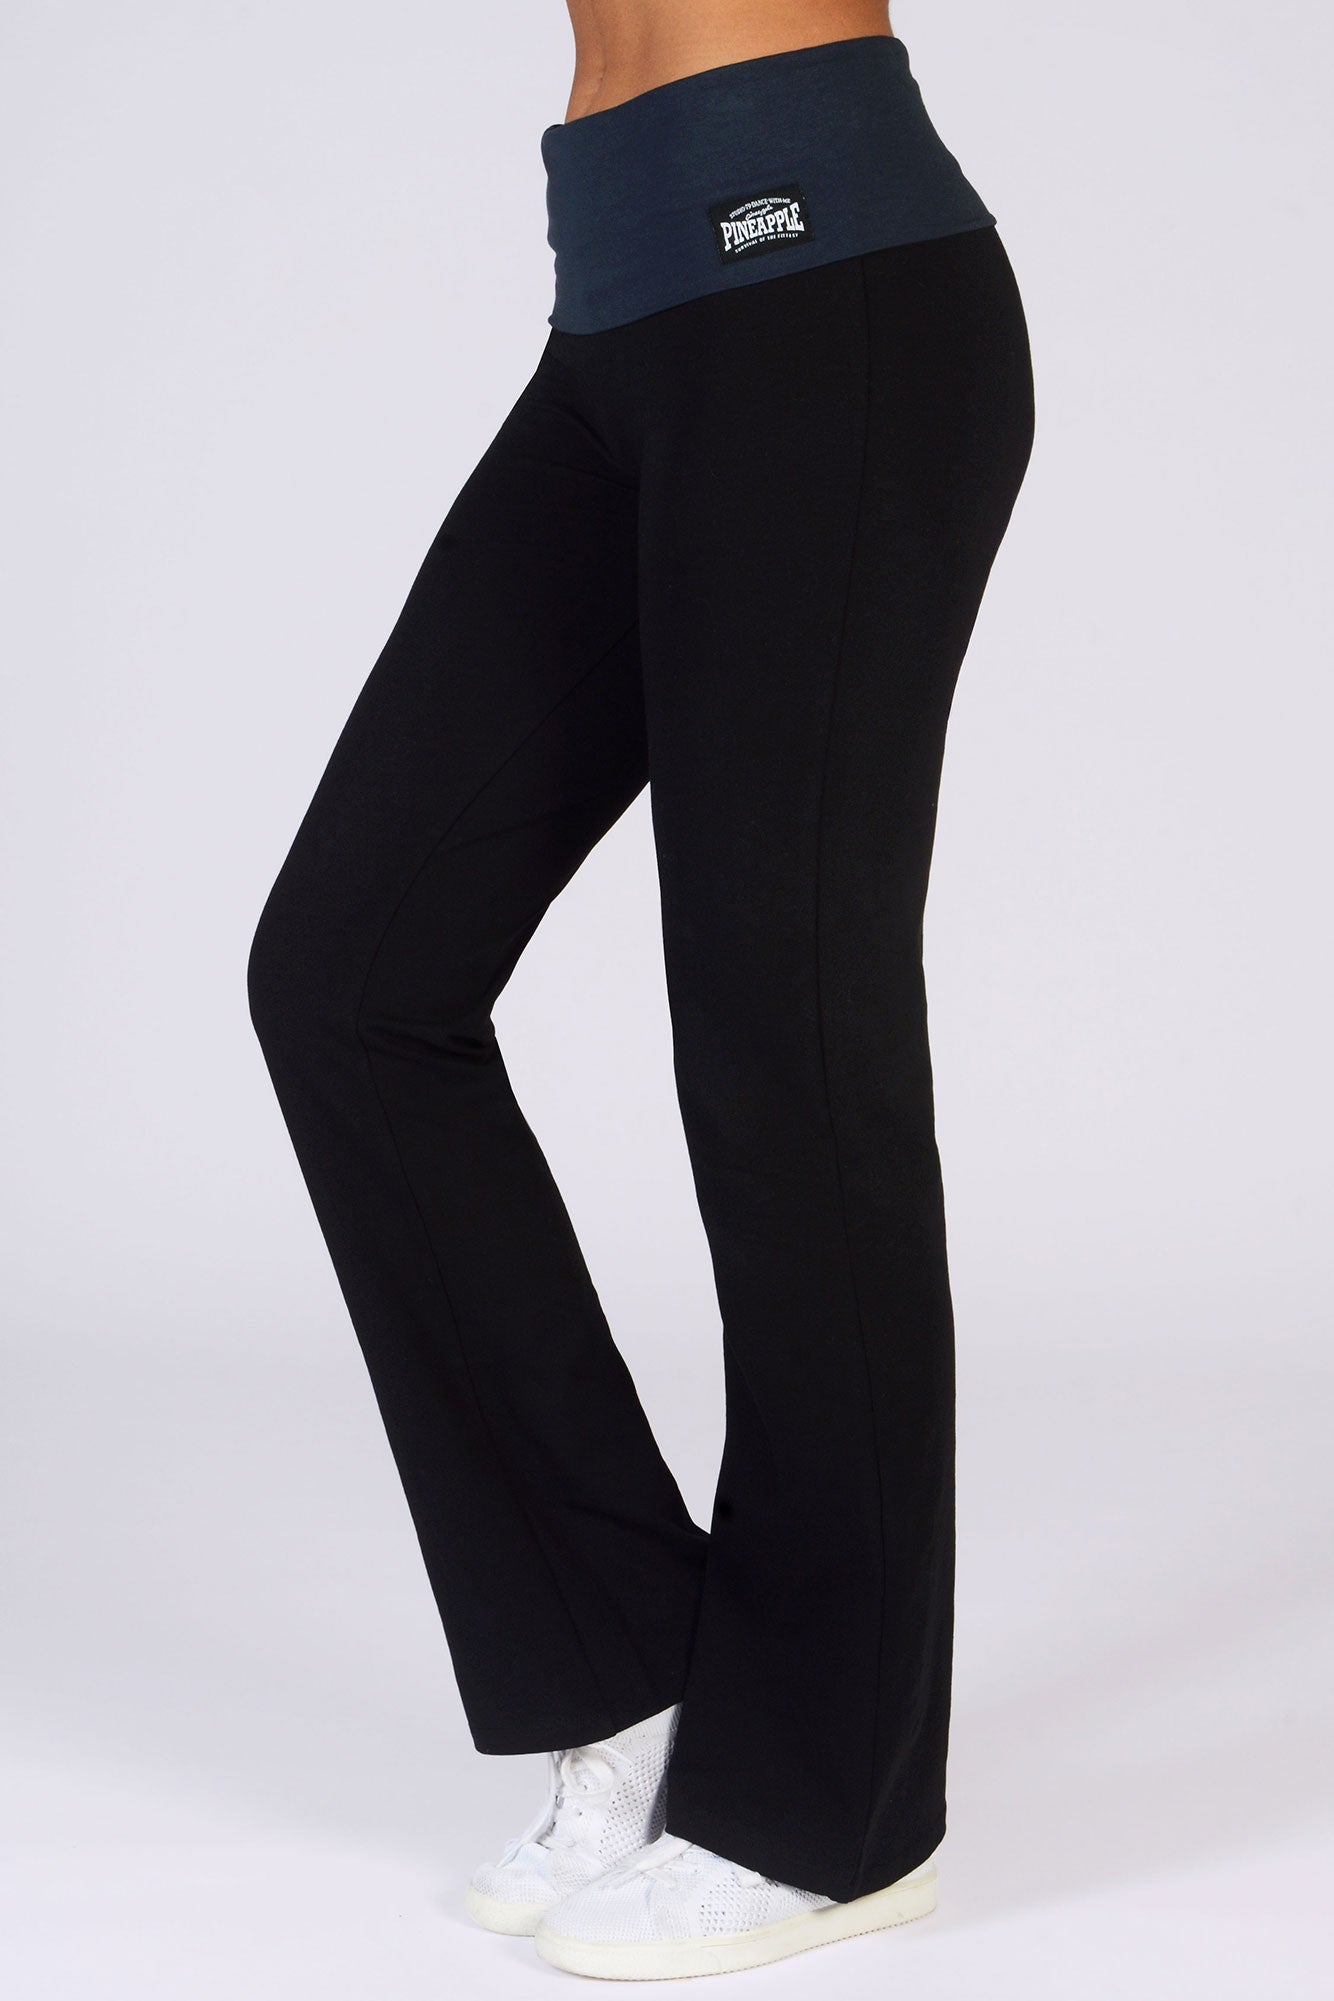 Women's Black Jersey Trousers with Fold Waistband